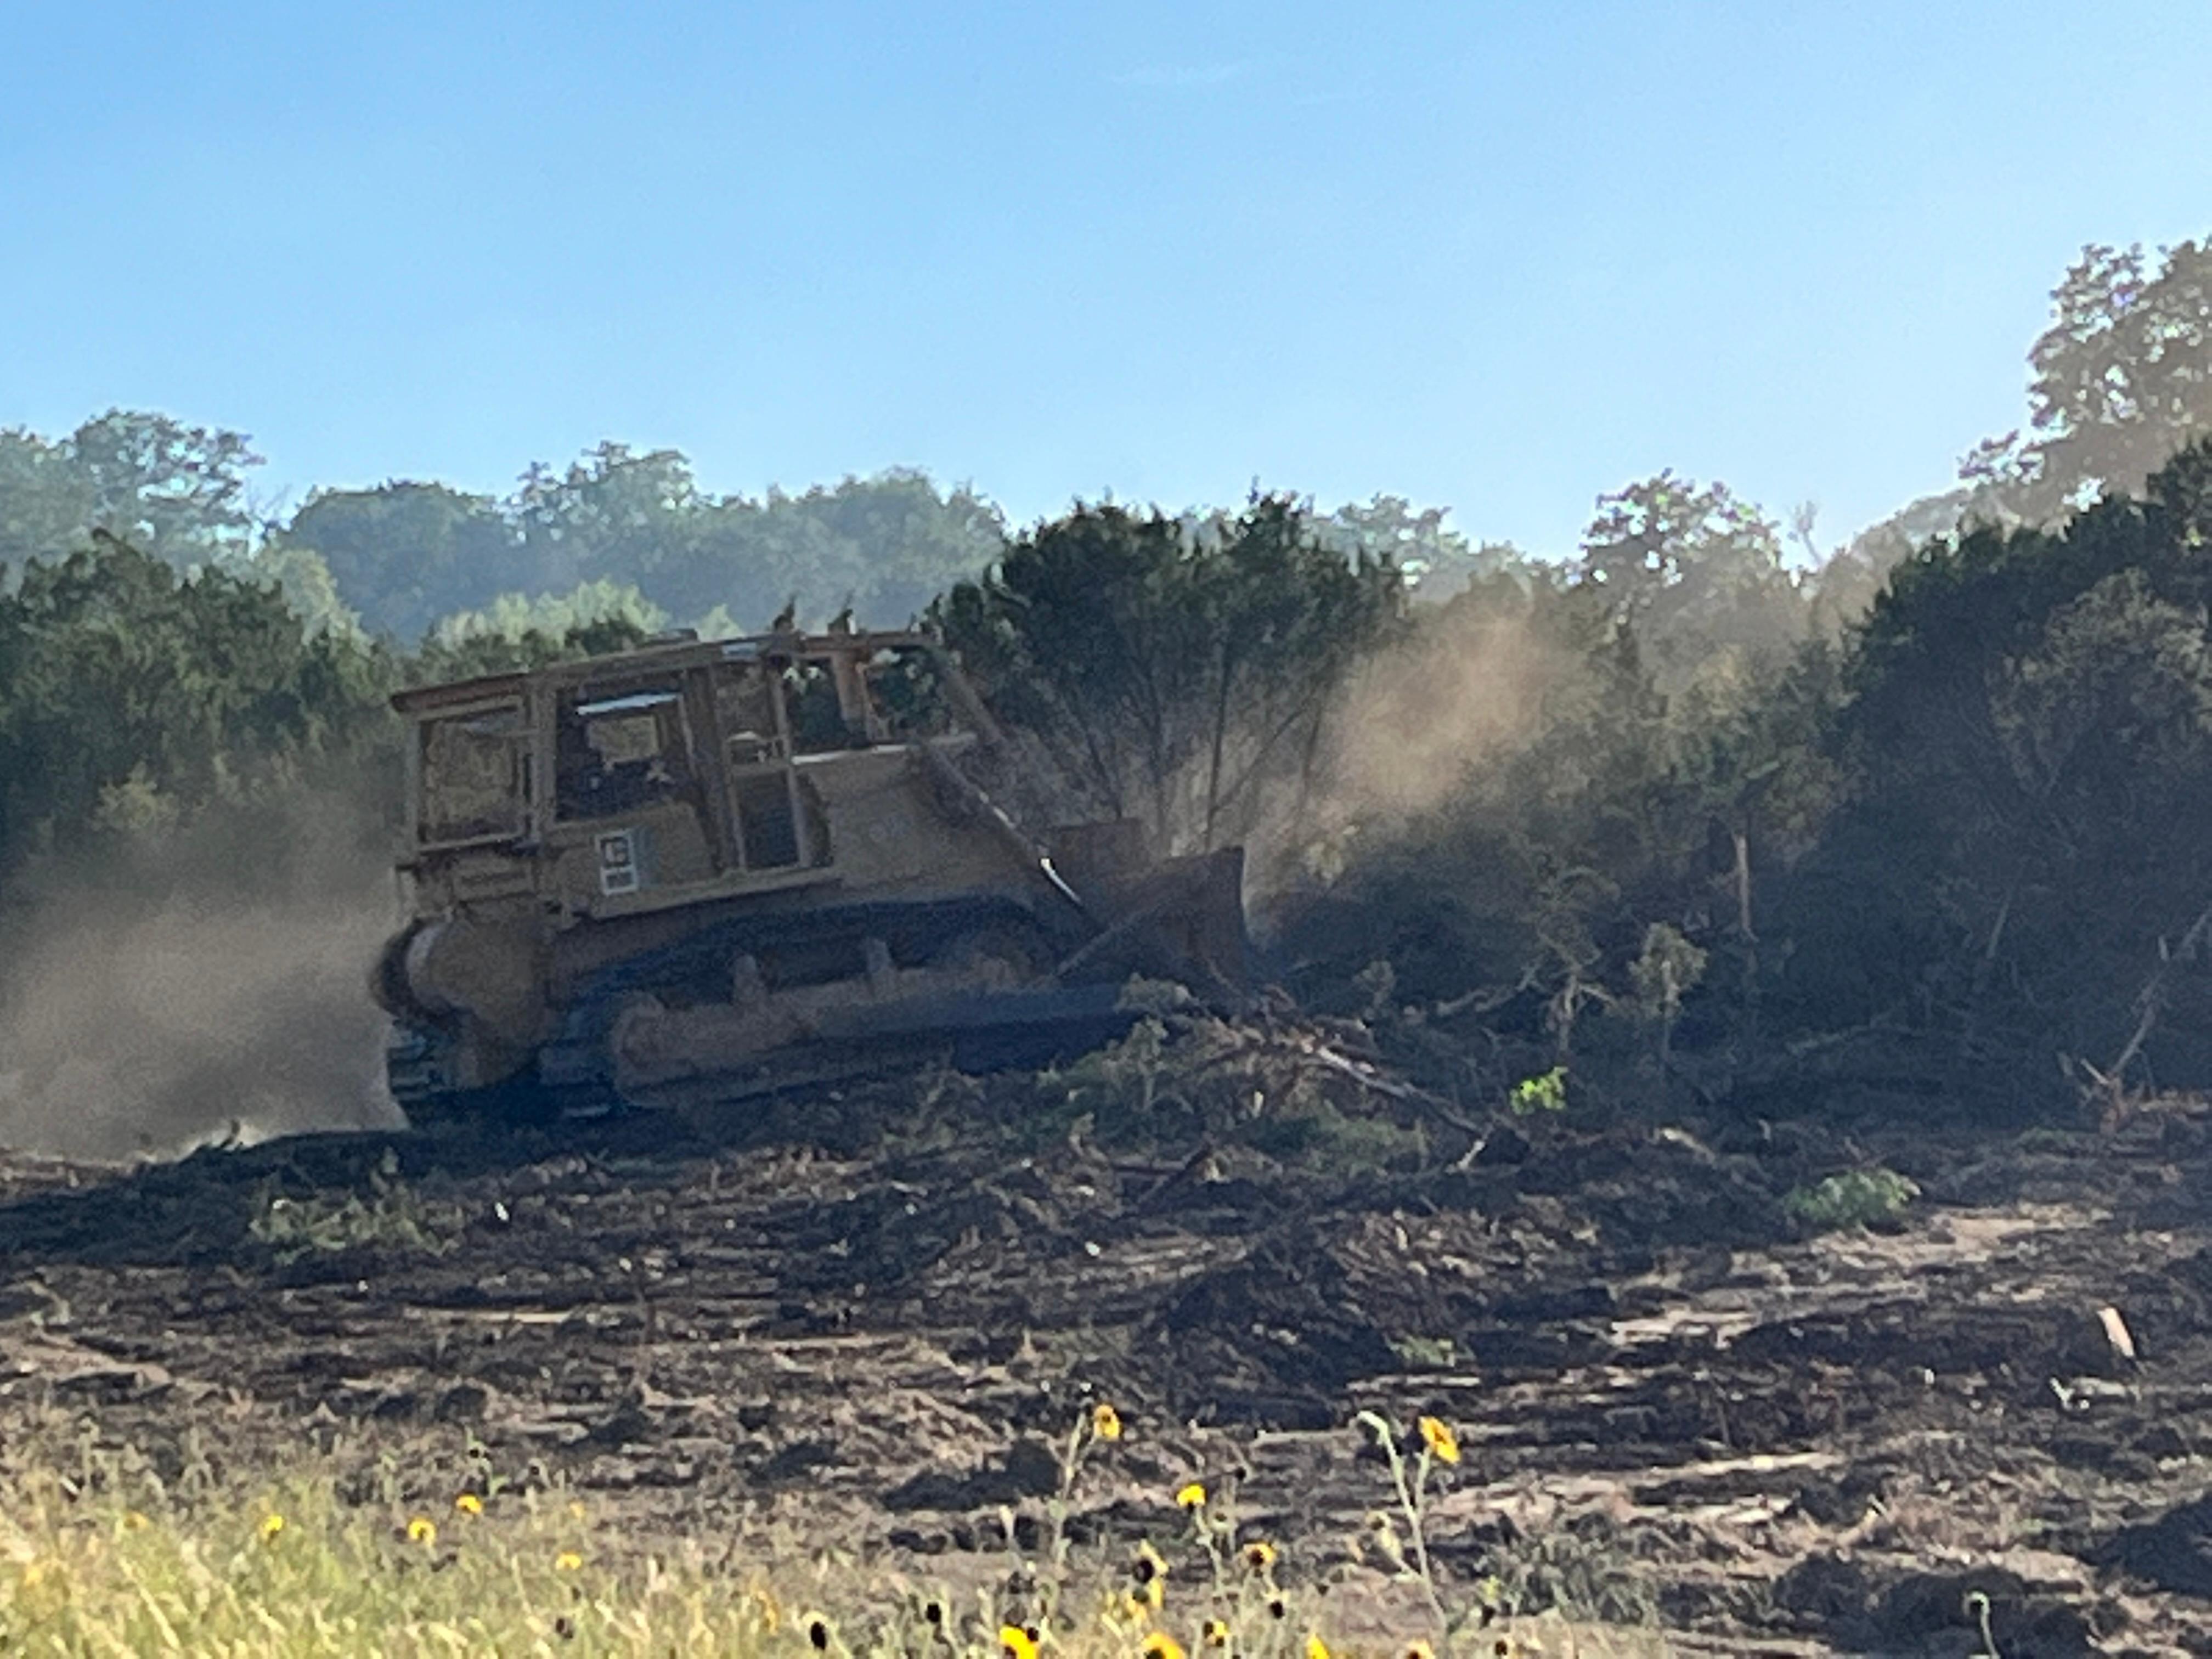 This picture shows an area that has been worked by a dozer clearing trees. the dozer is also shown pushing more trees to widen the area